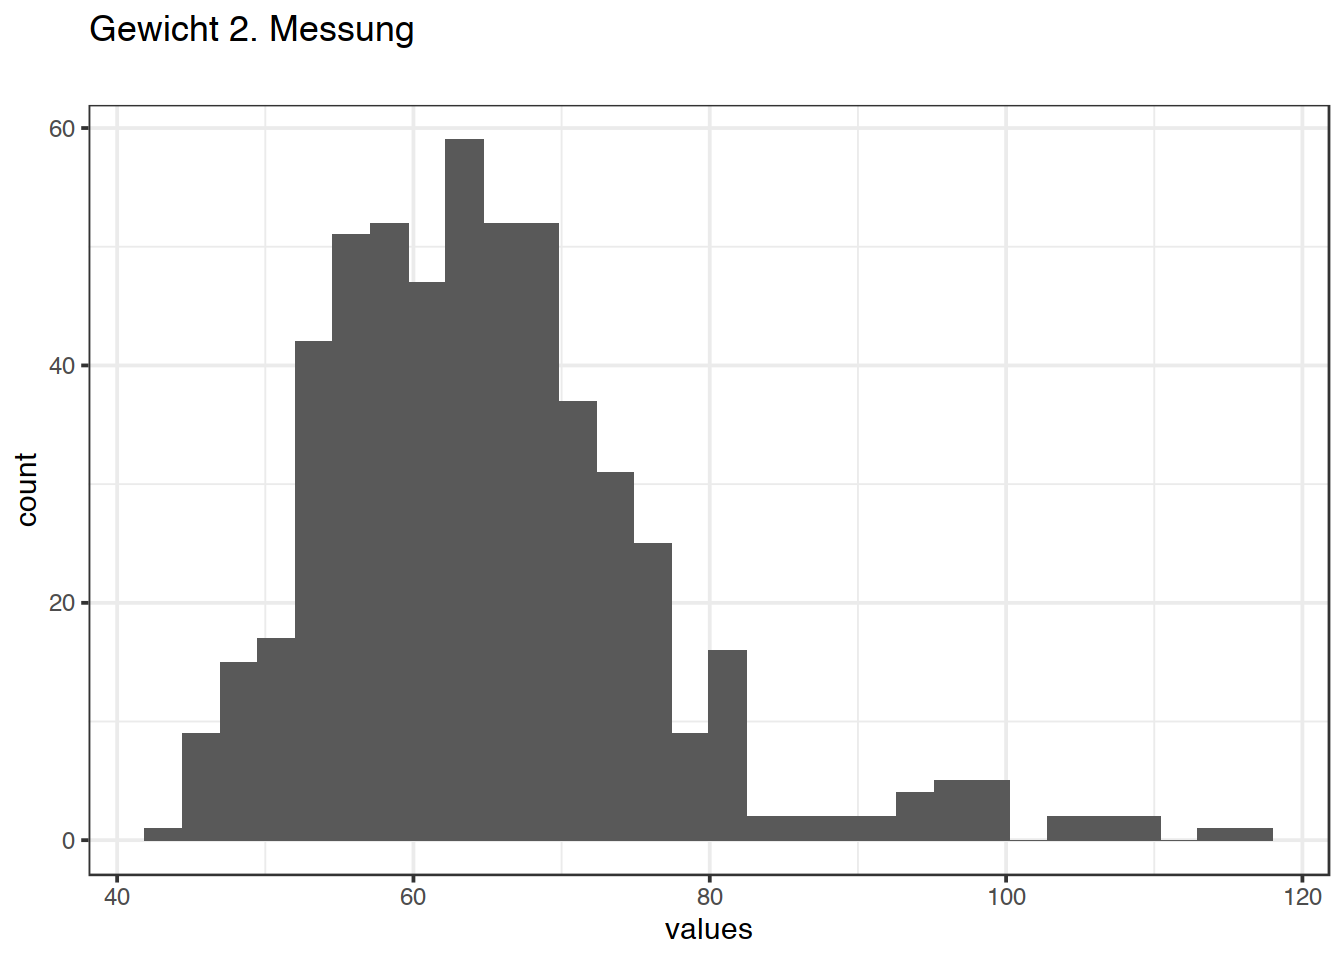 Distribution of values for Gewicht 2. Messung